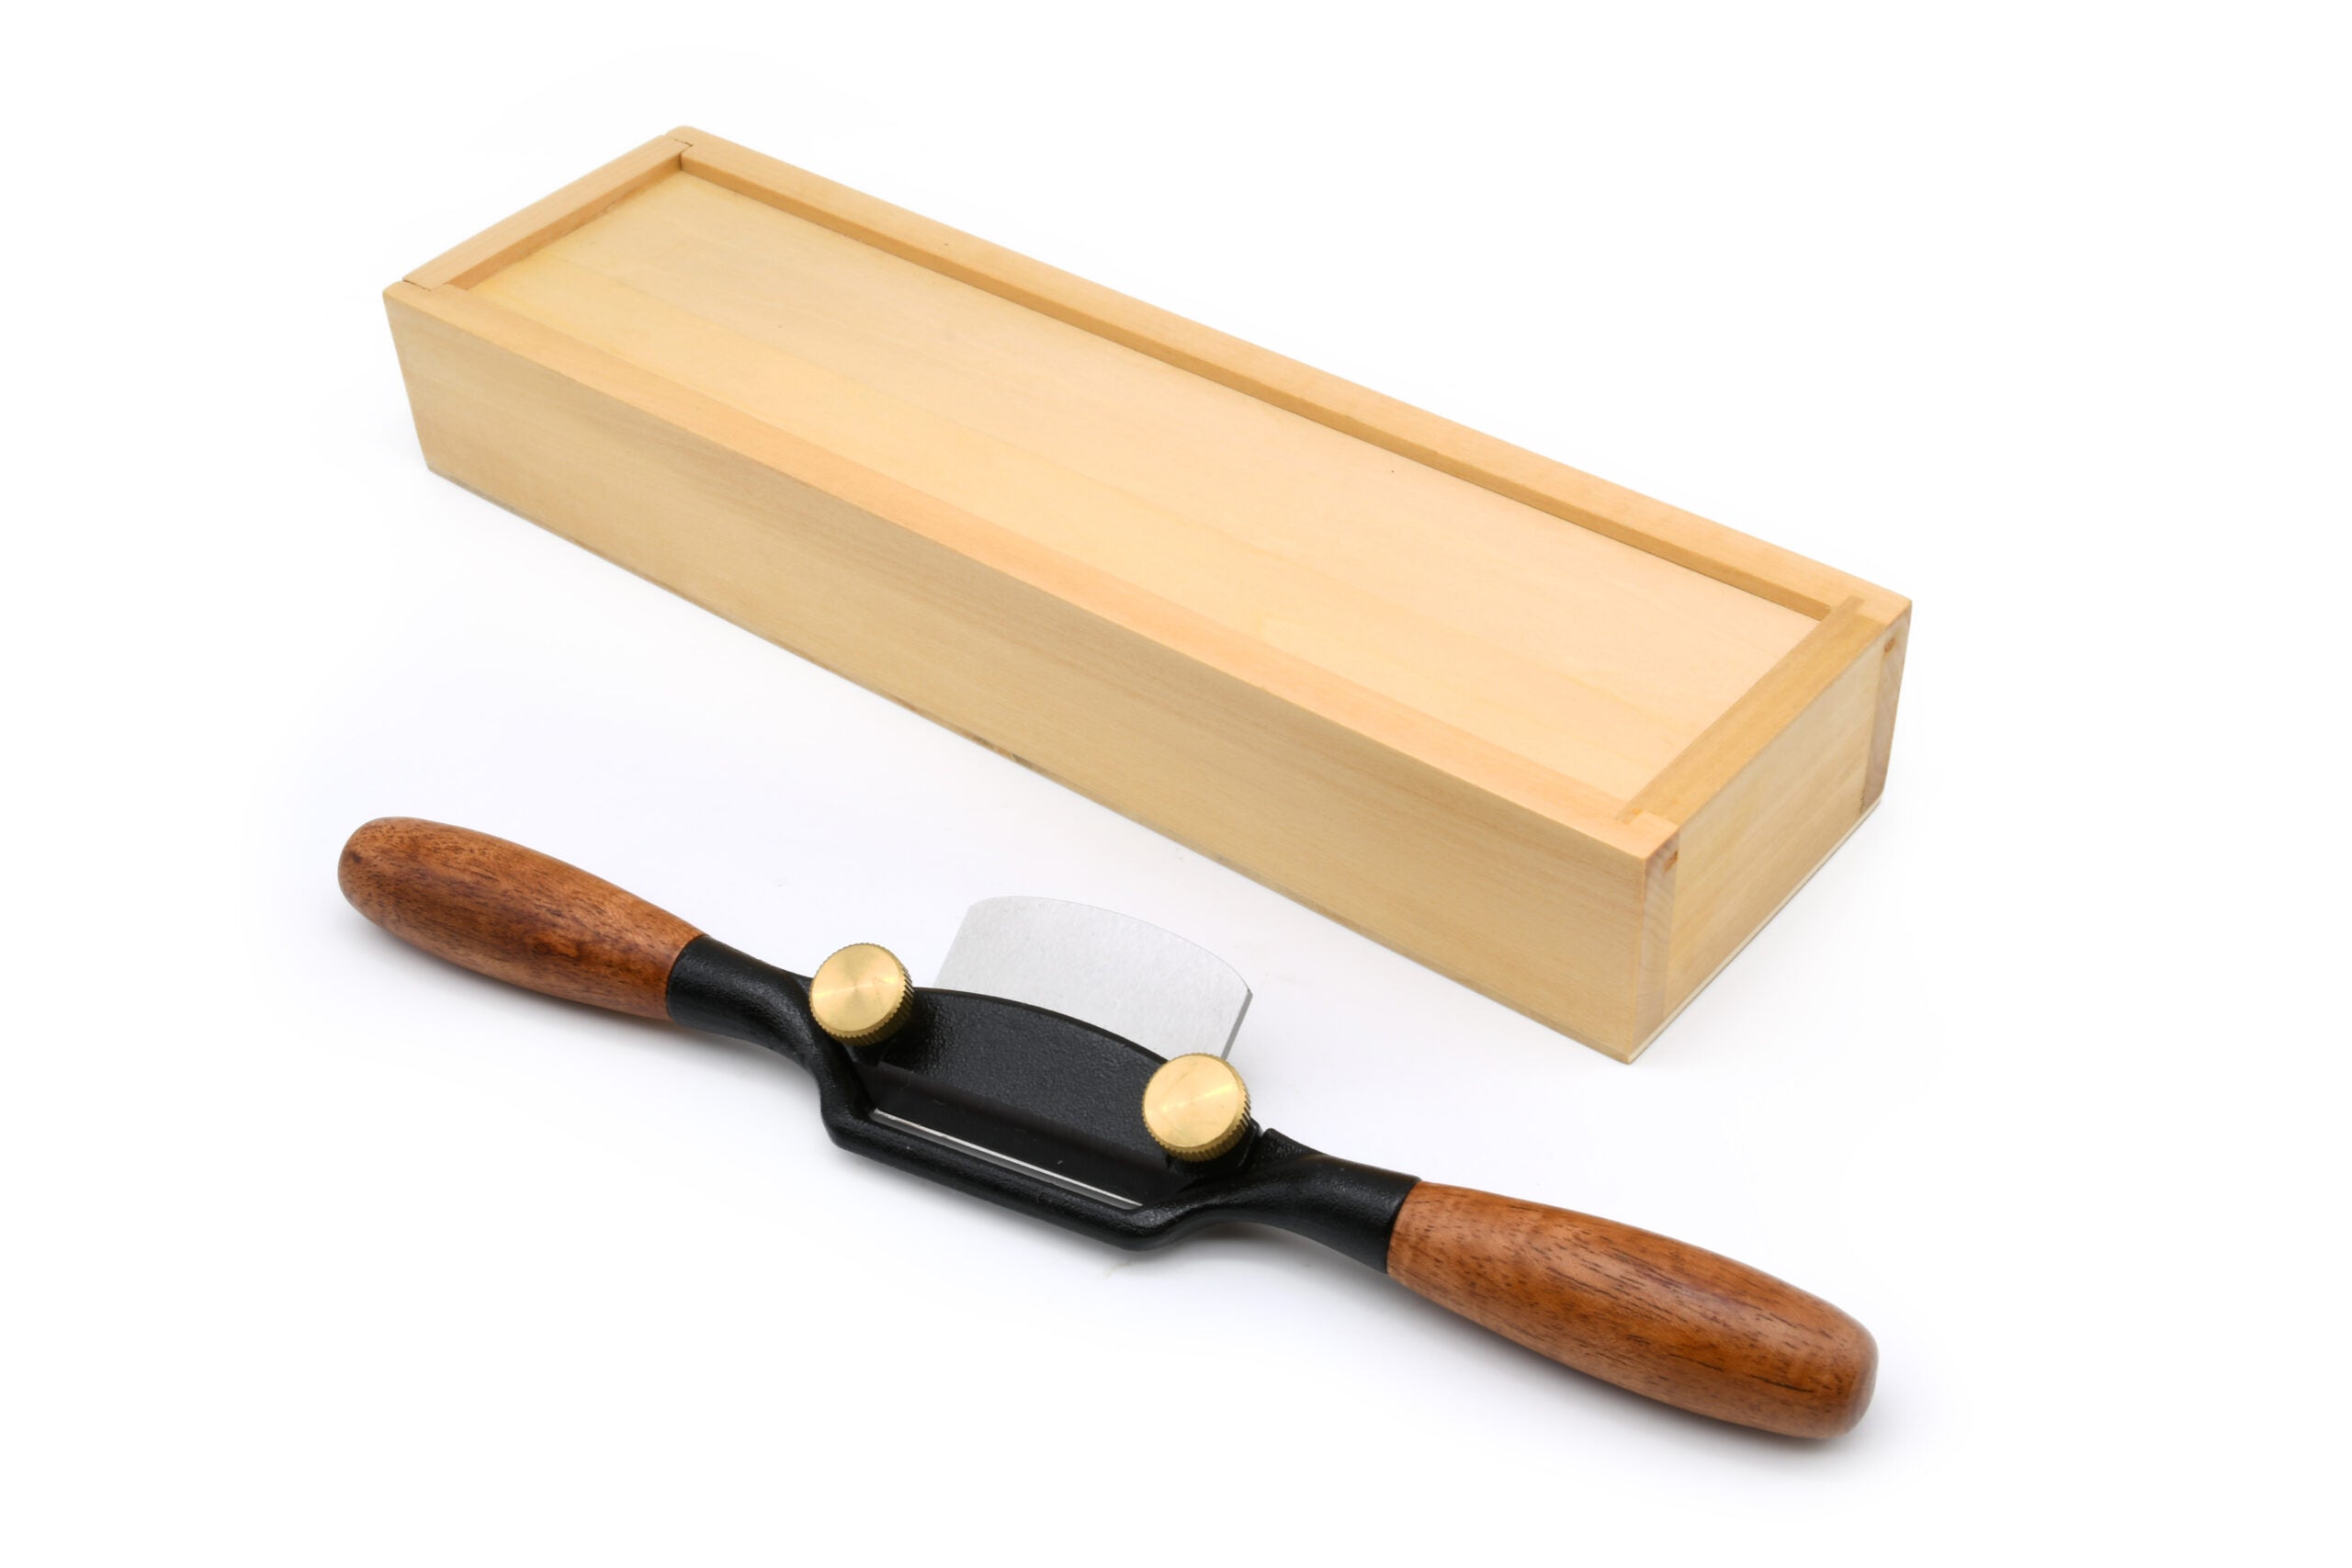 Planet Flat Spokeshave in Wooden Box